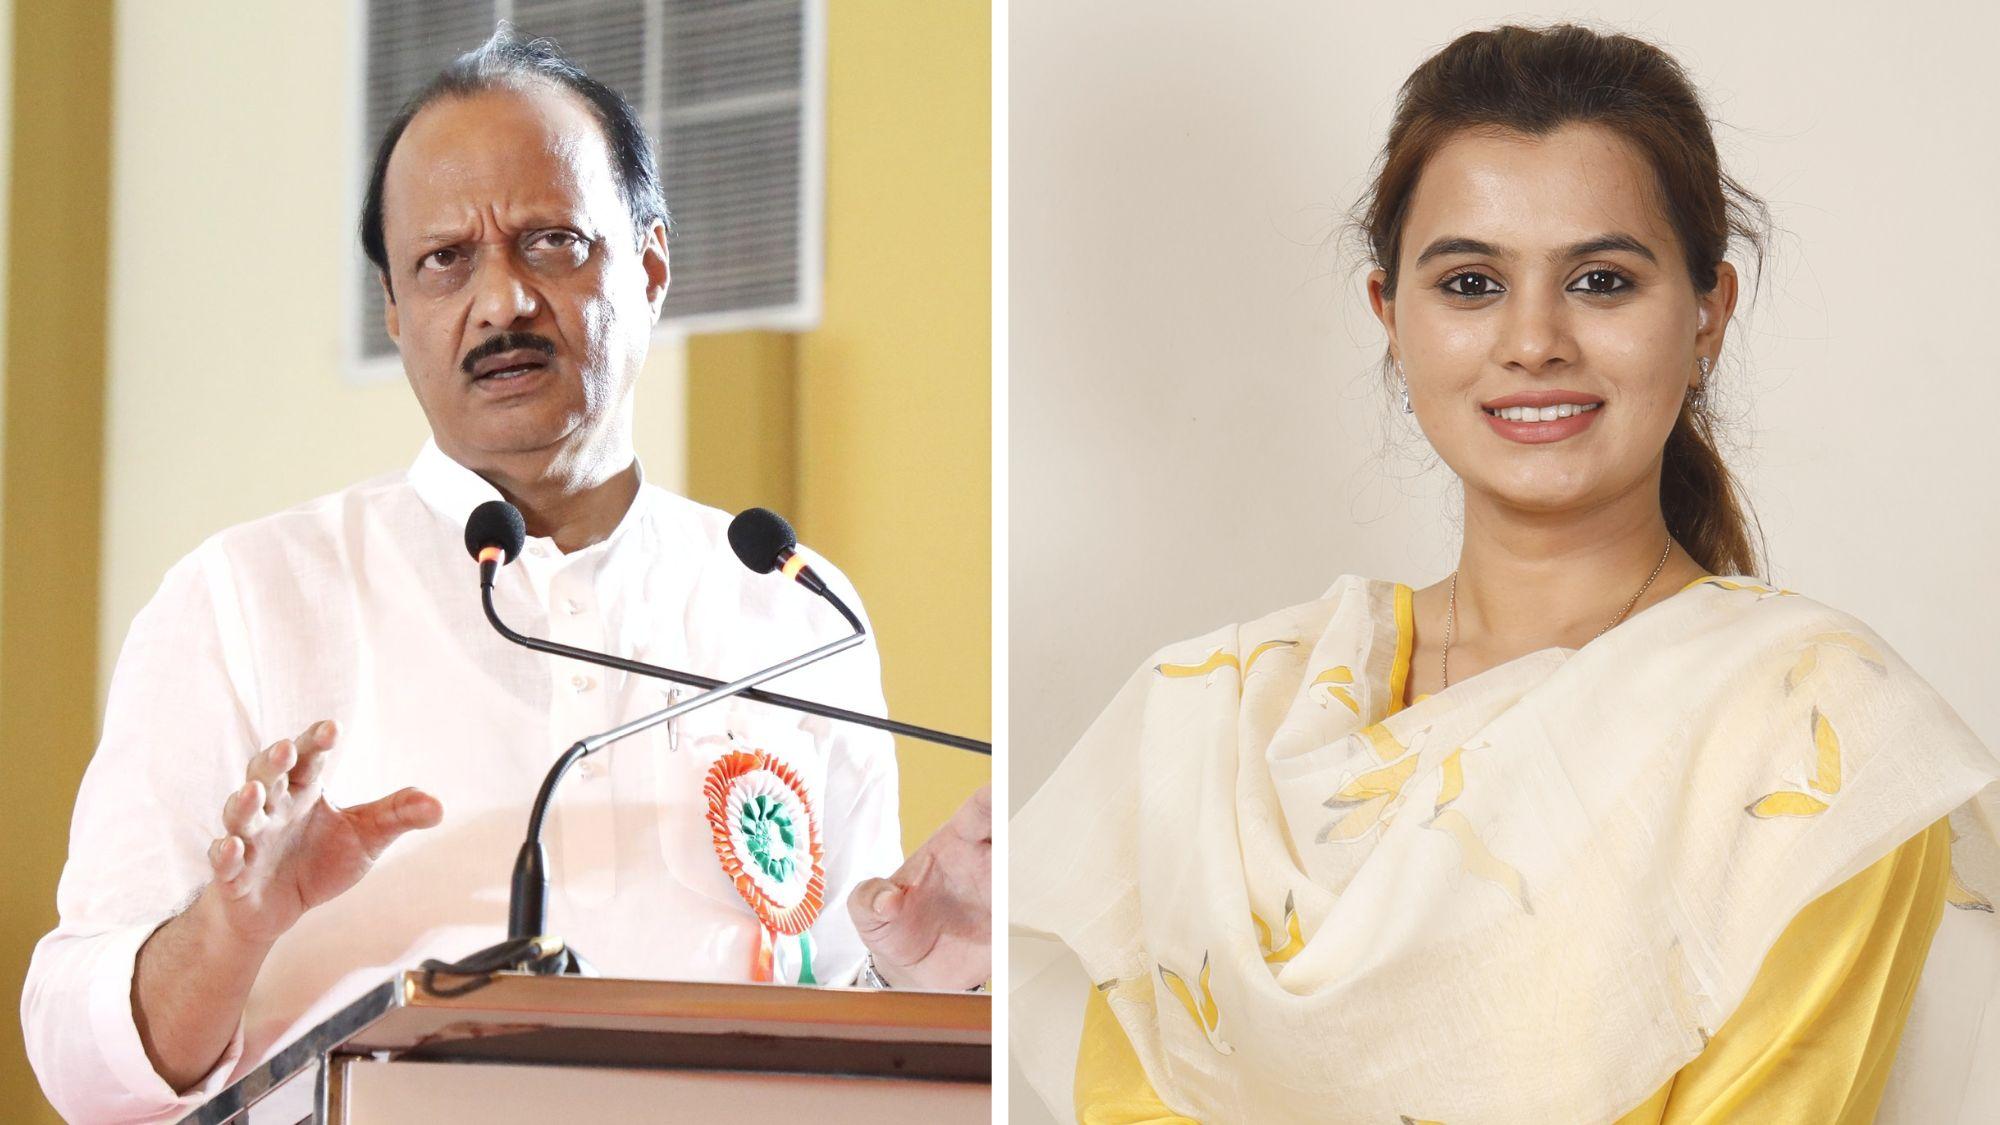 Ankita Patil, Harshvardhan Patil daughter has made serious allegations against Ajit Pawar, the political atmosphere of Baramati Lok Sabha constituency has heated up,